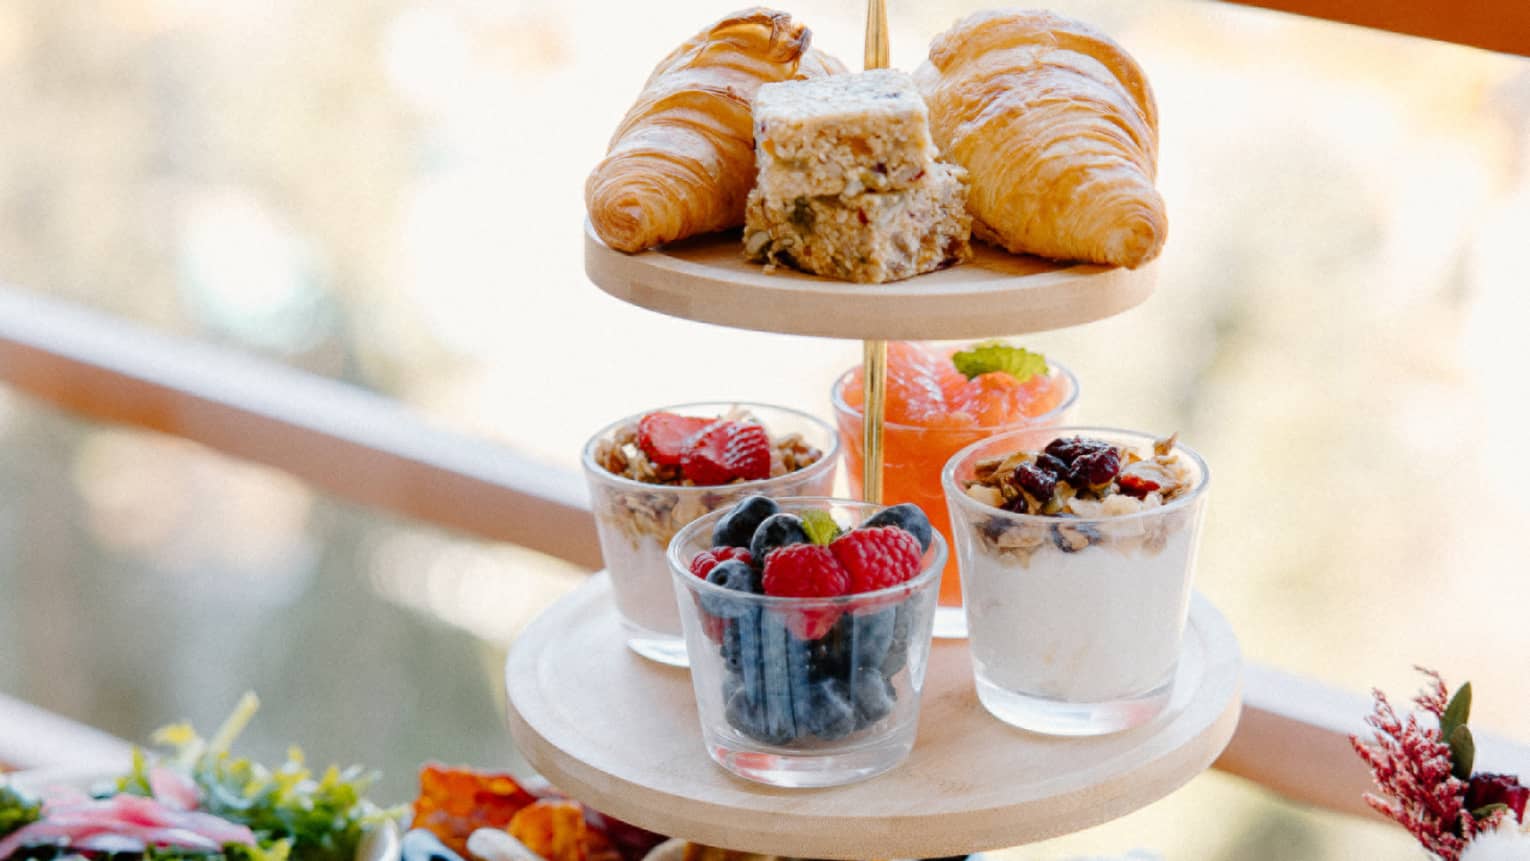 Three-tier tower with breakfast spread on outdoor table